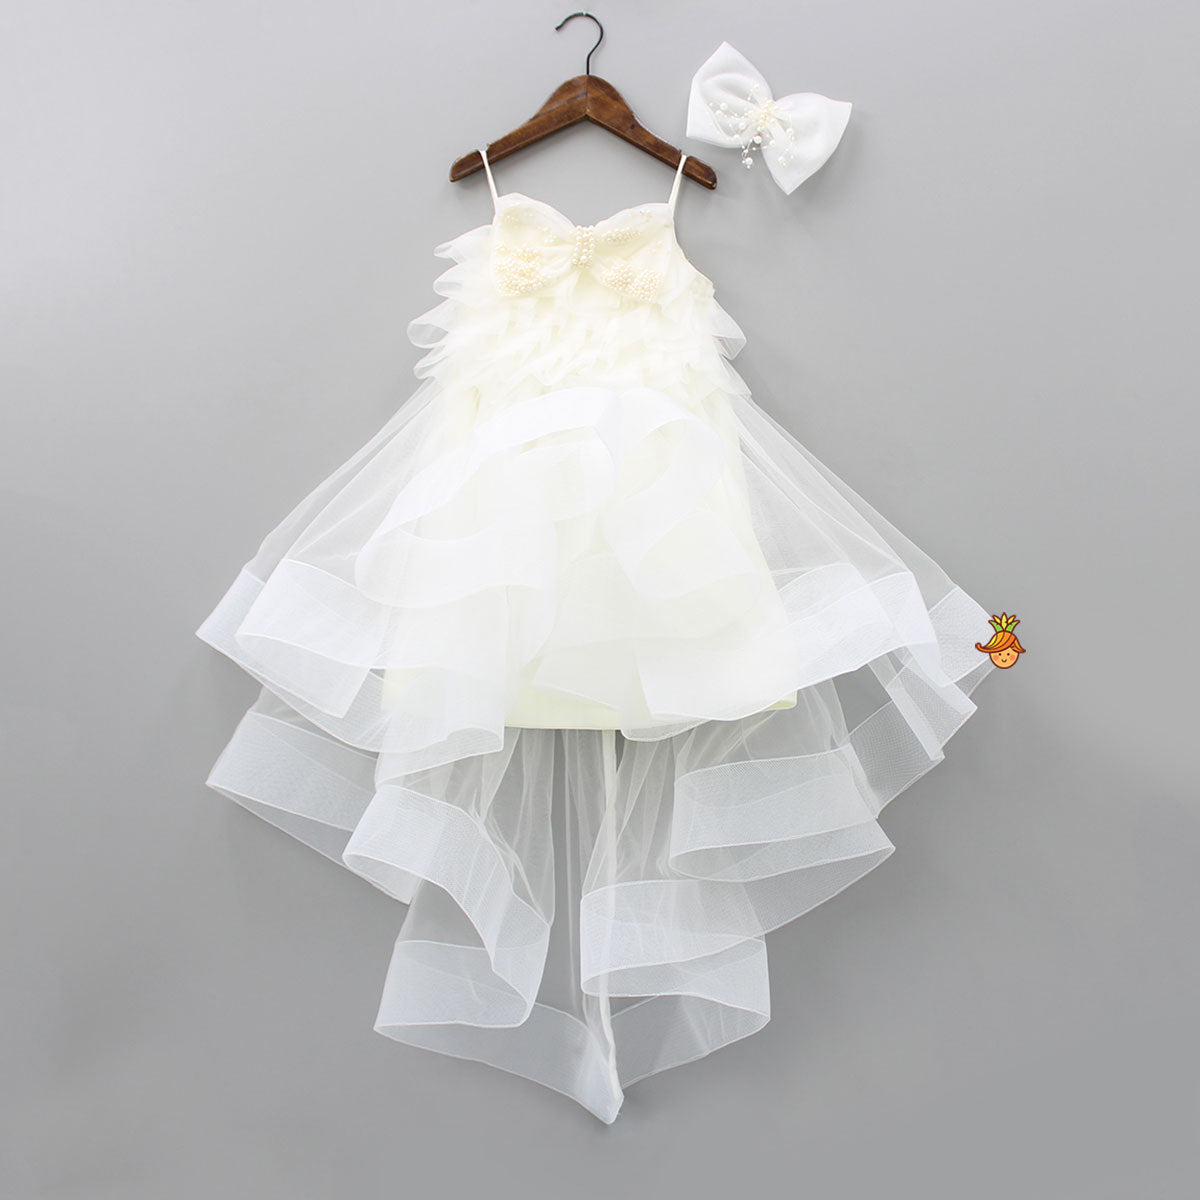 Pre Order: Stylish Off White Trail Dress With Bowie Pearl String Hair Clip